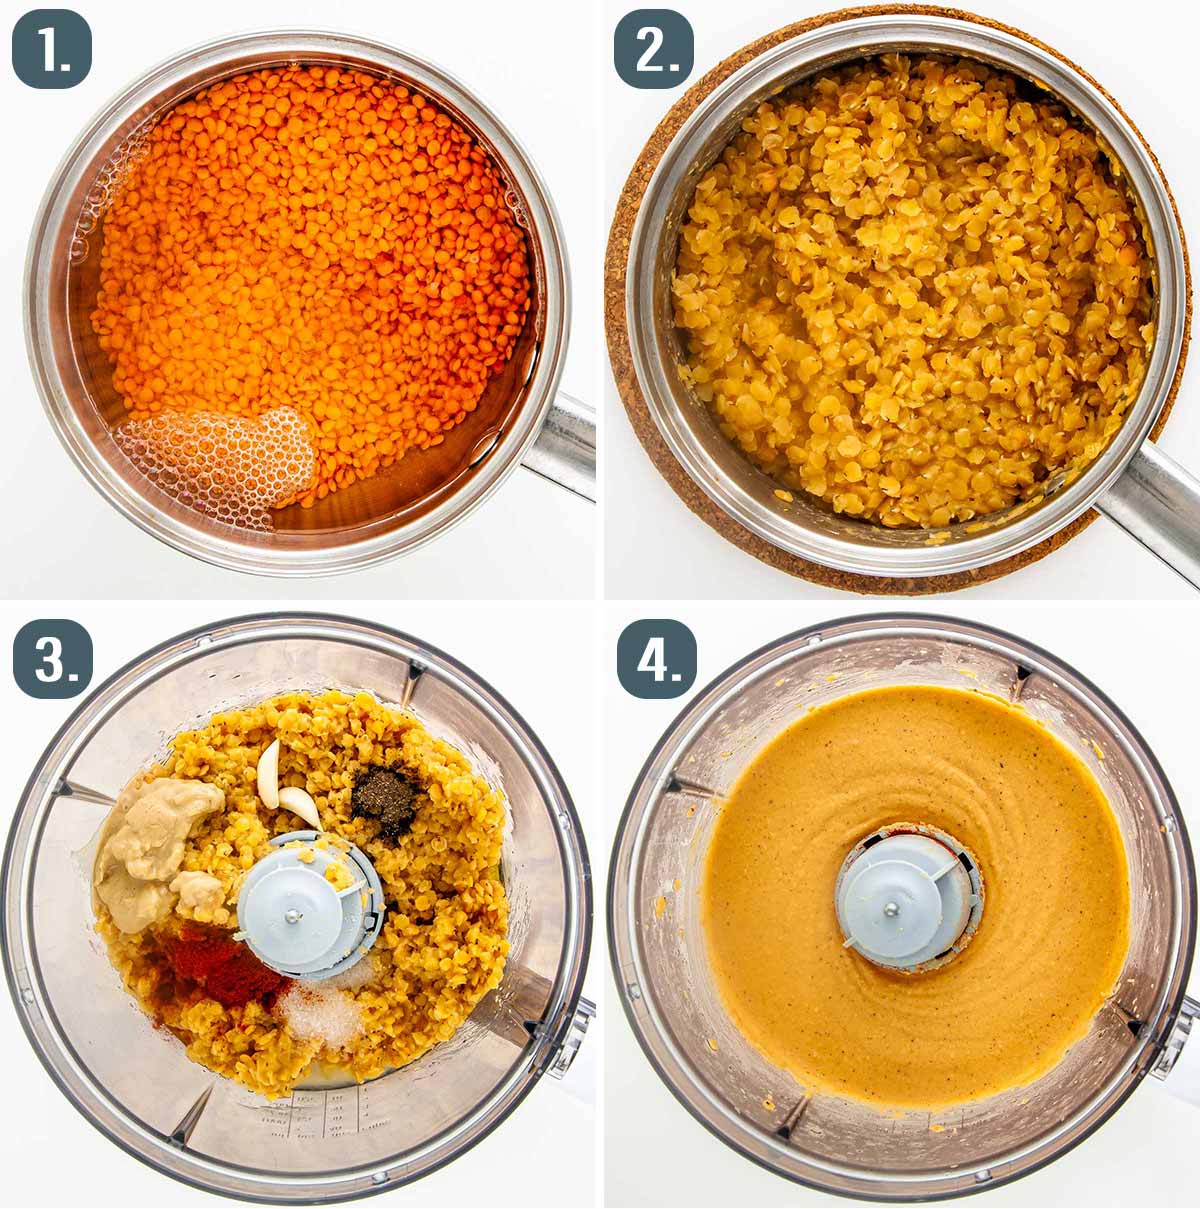 detailed process shots showing how to make red lentil hummus.